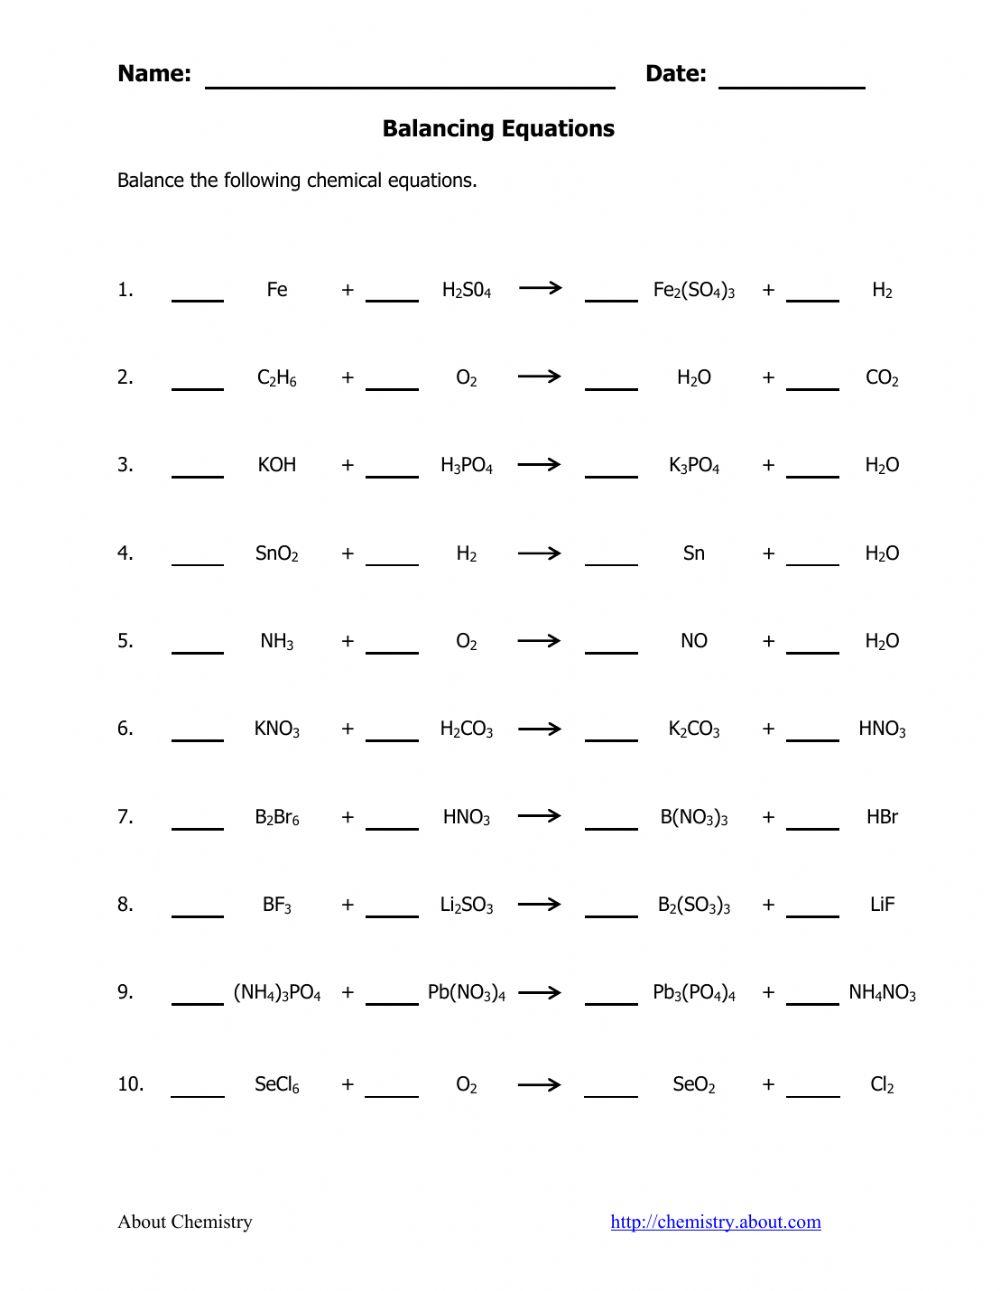 Balancing Equations Practice online exercise for | Live Worksheets